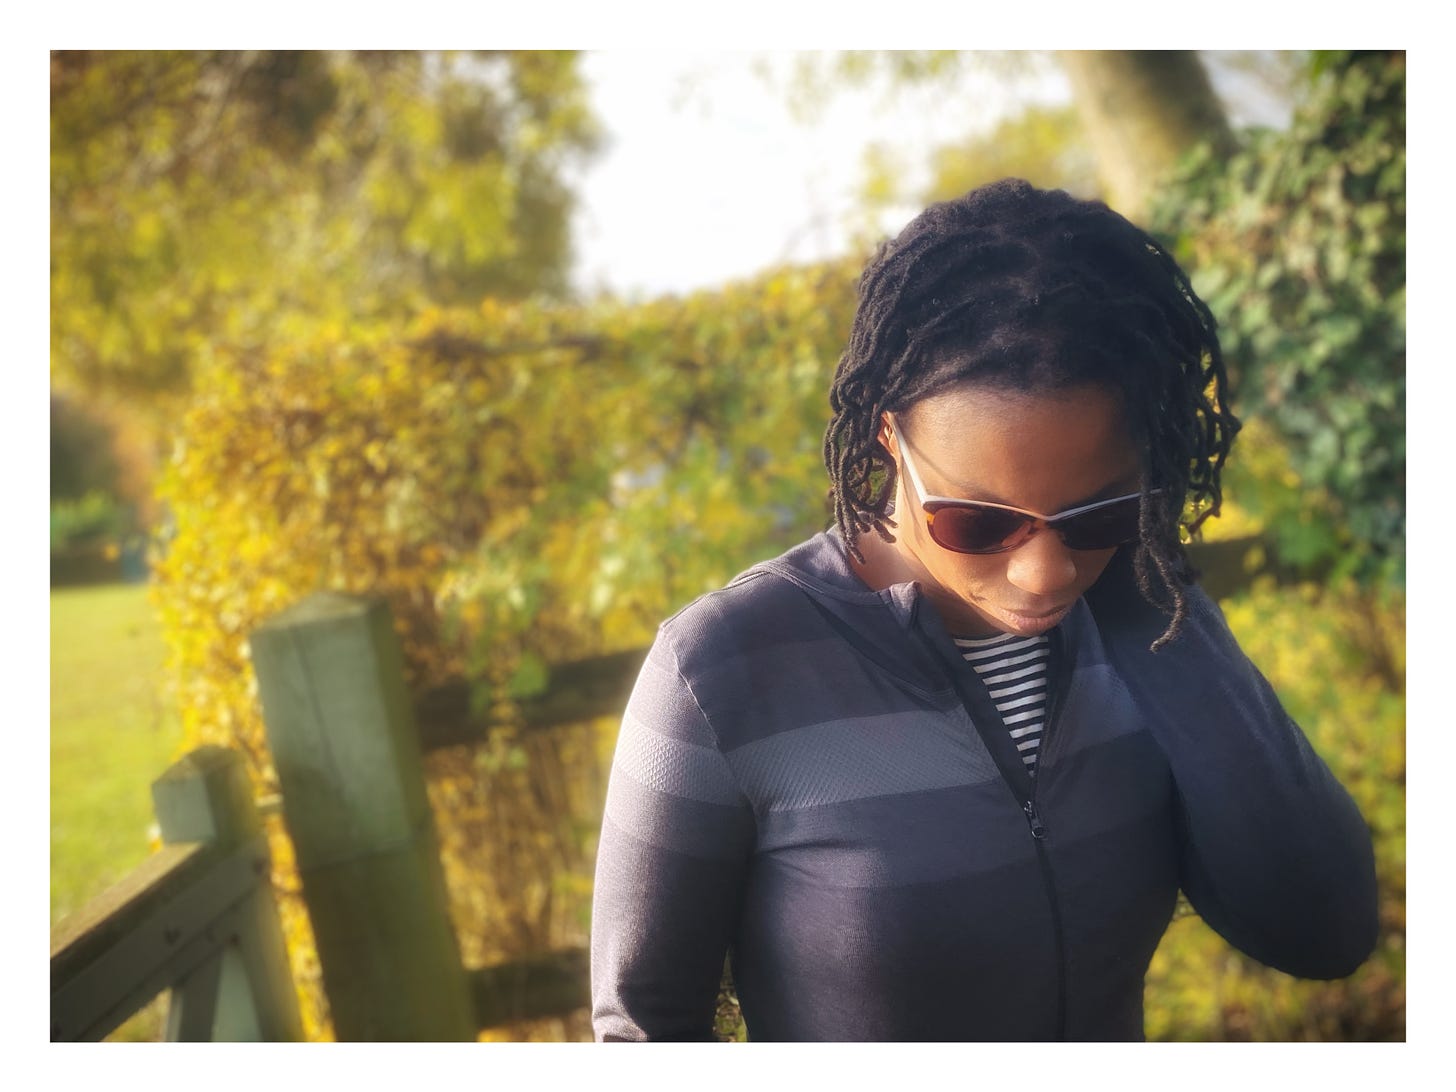 Sandra wears sunglasses, head slightly down cast with Black locs wearing a grey longsleeved shirt with a yellow leaves and fence in background